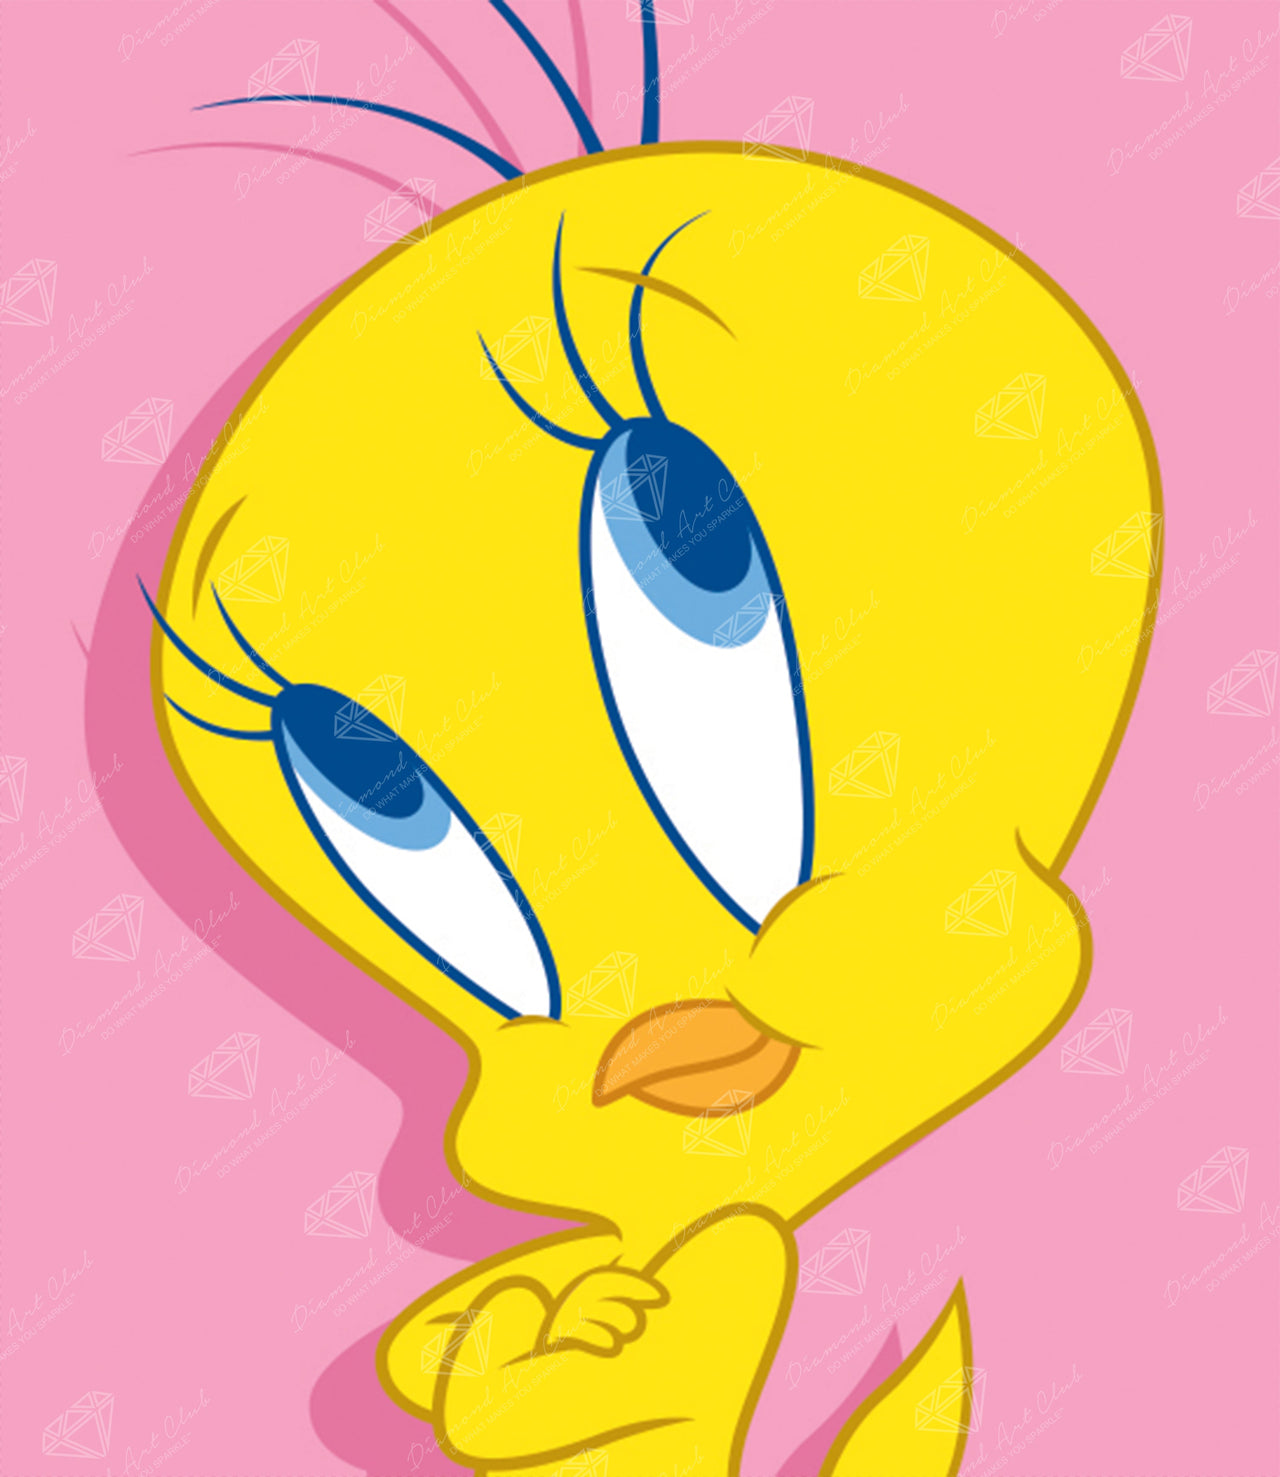 Diamond Painting Tweety Bird™ 13" x 15" (32.8cm x 37.8cm) / Round With 9 Colors Including 1 ABs and 1 Fairy Dust Diamonds / 15,795